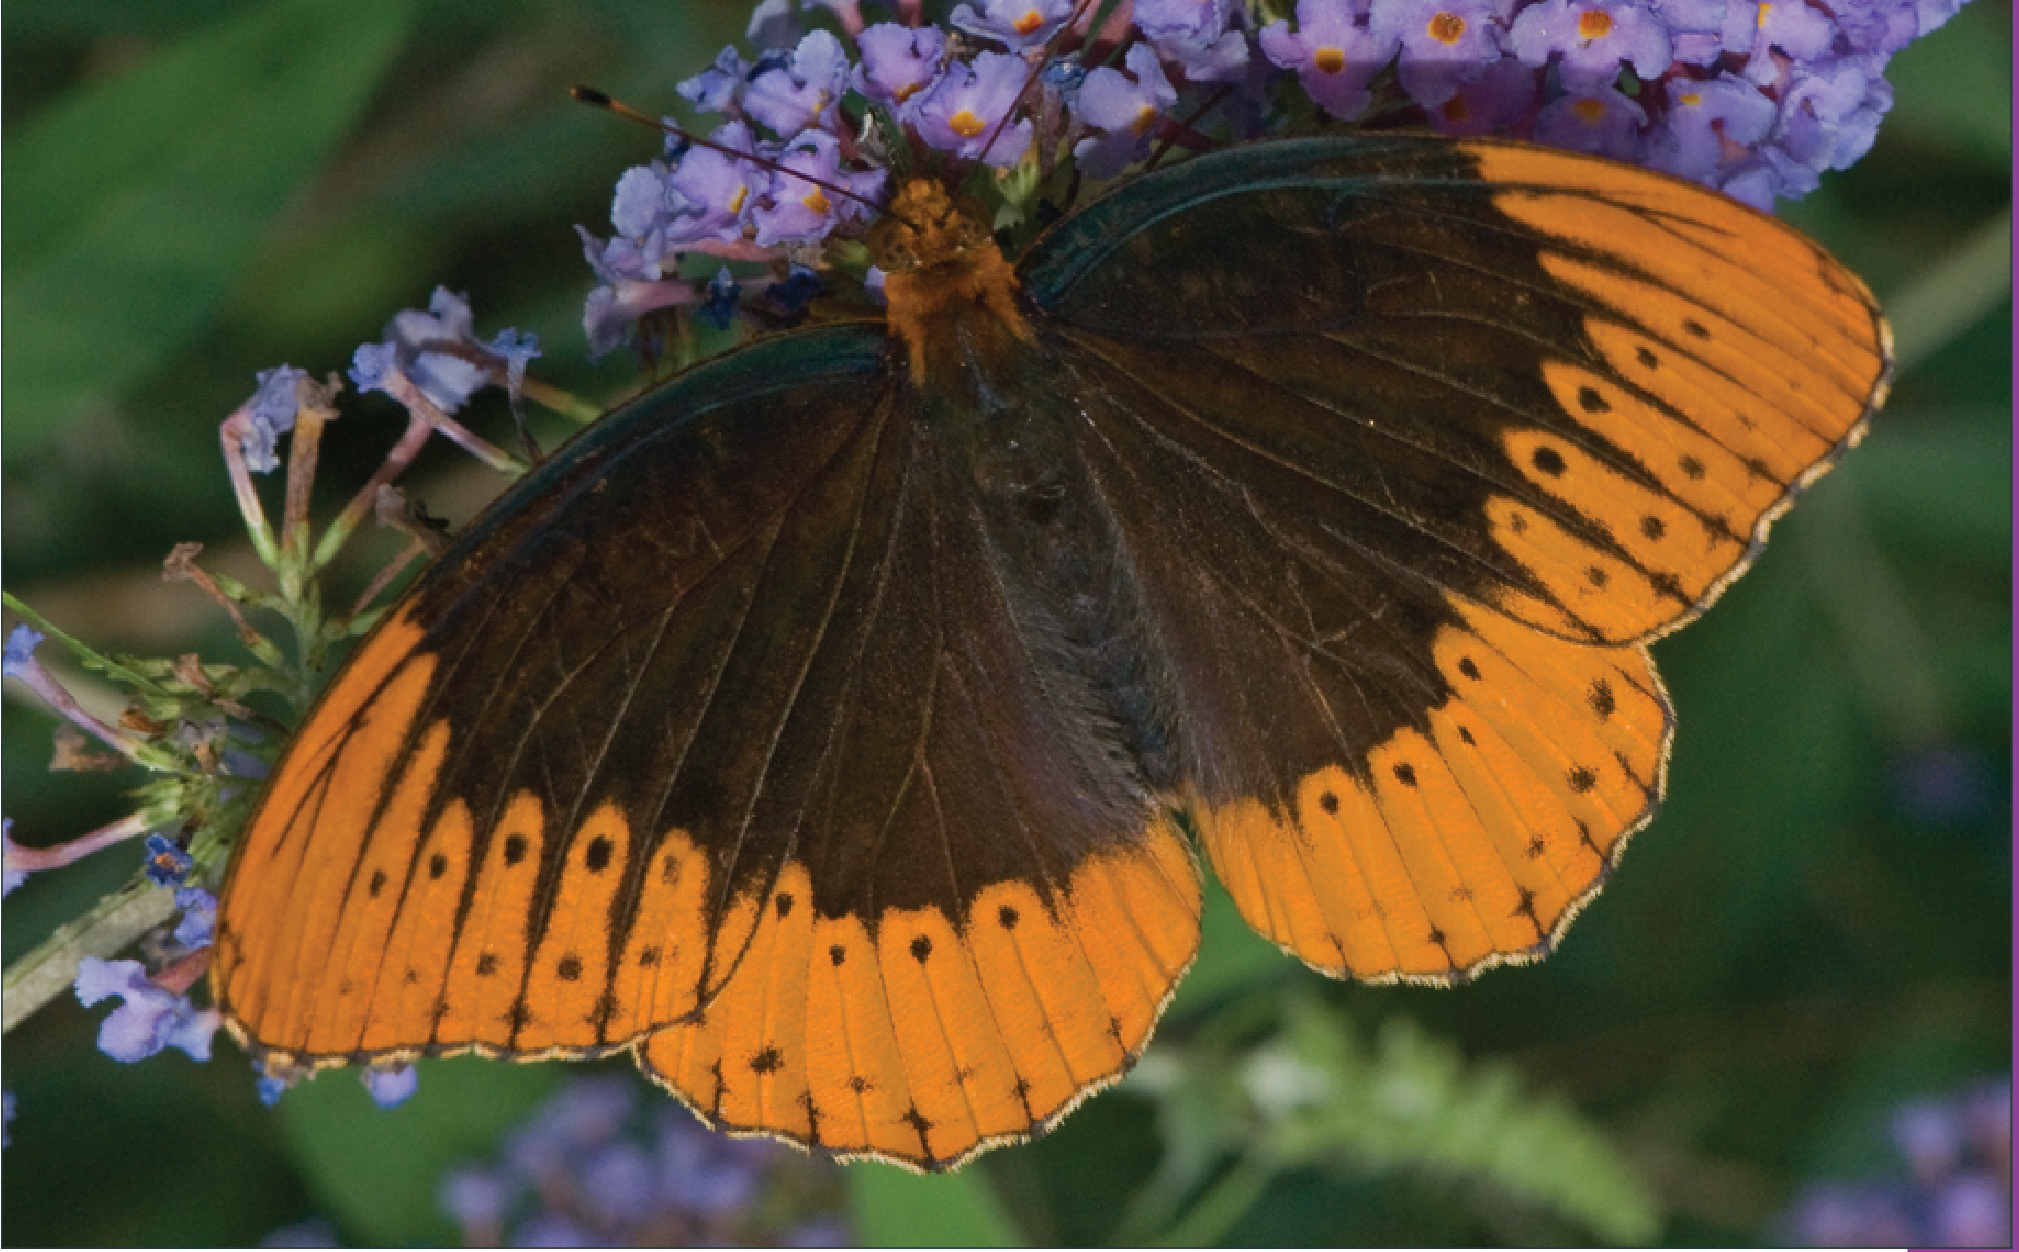 The Arkansas state butterfly, the Diana Fritillary, is at risk of being lost to The Natural State